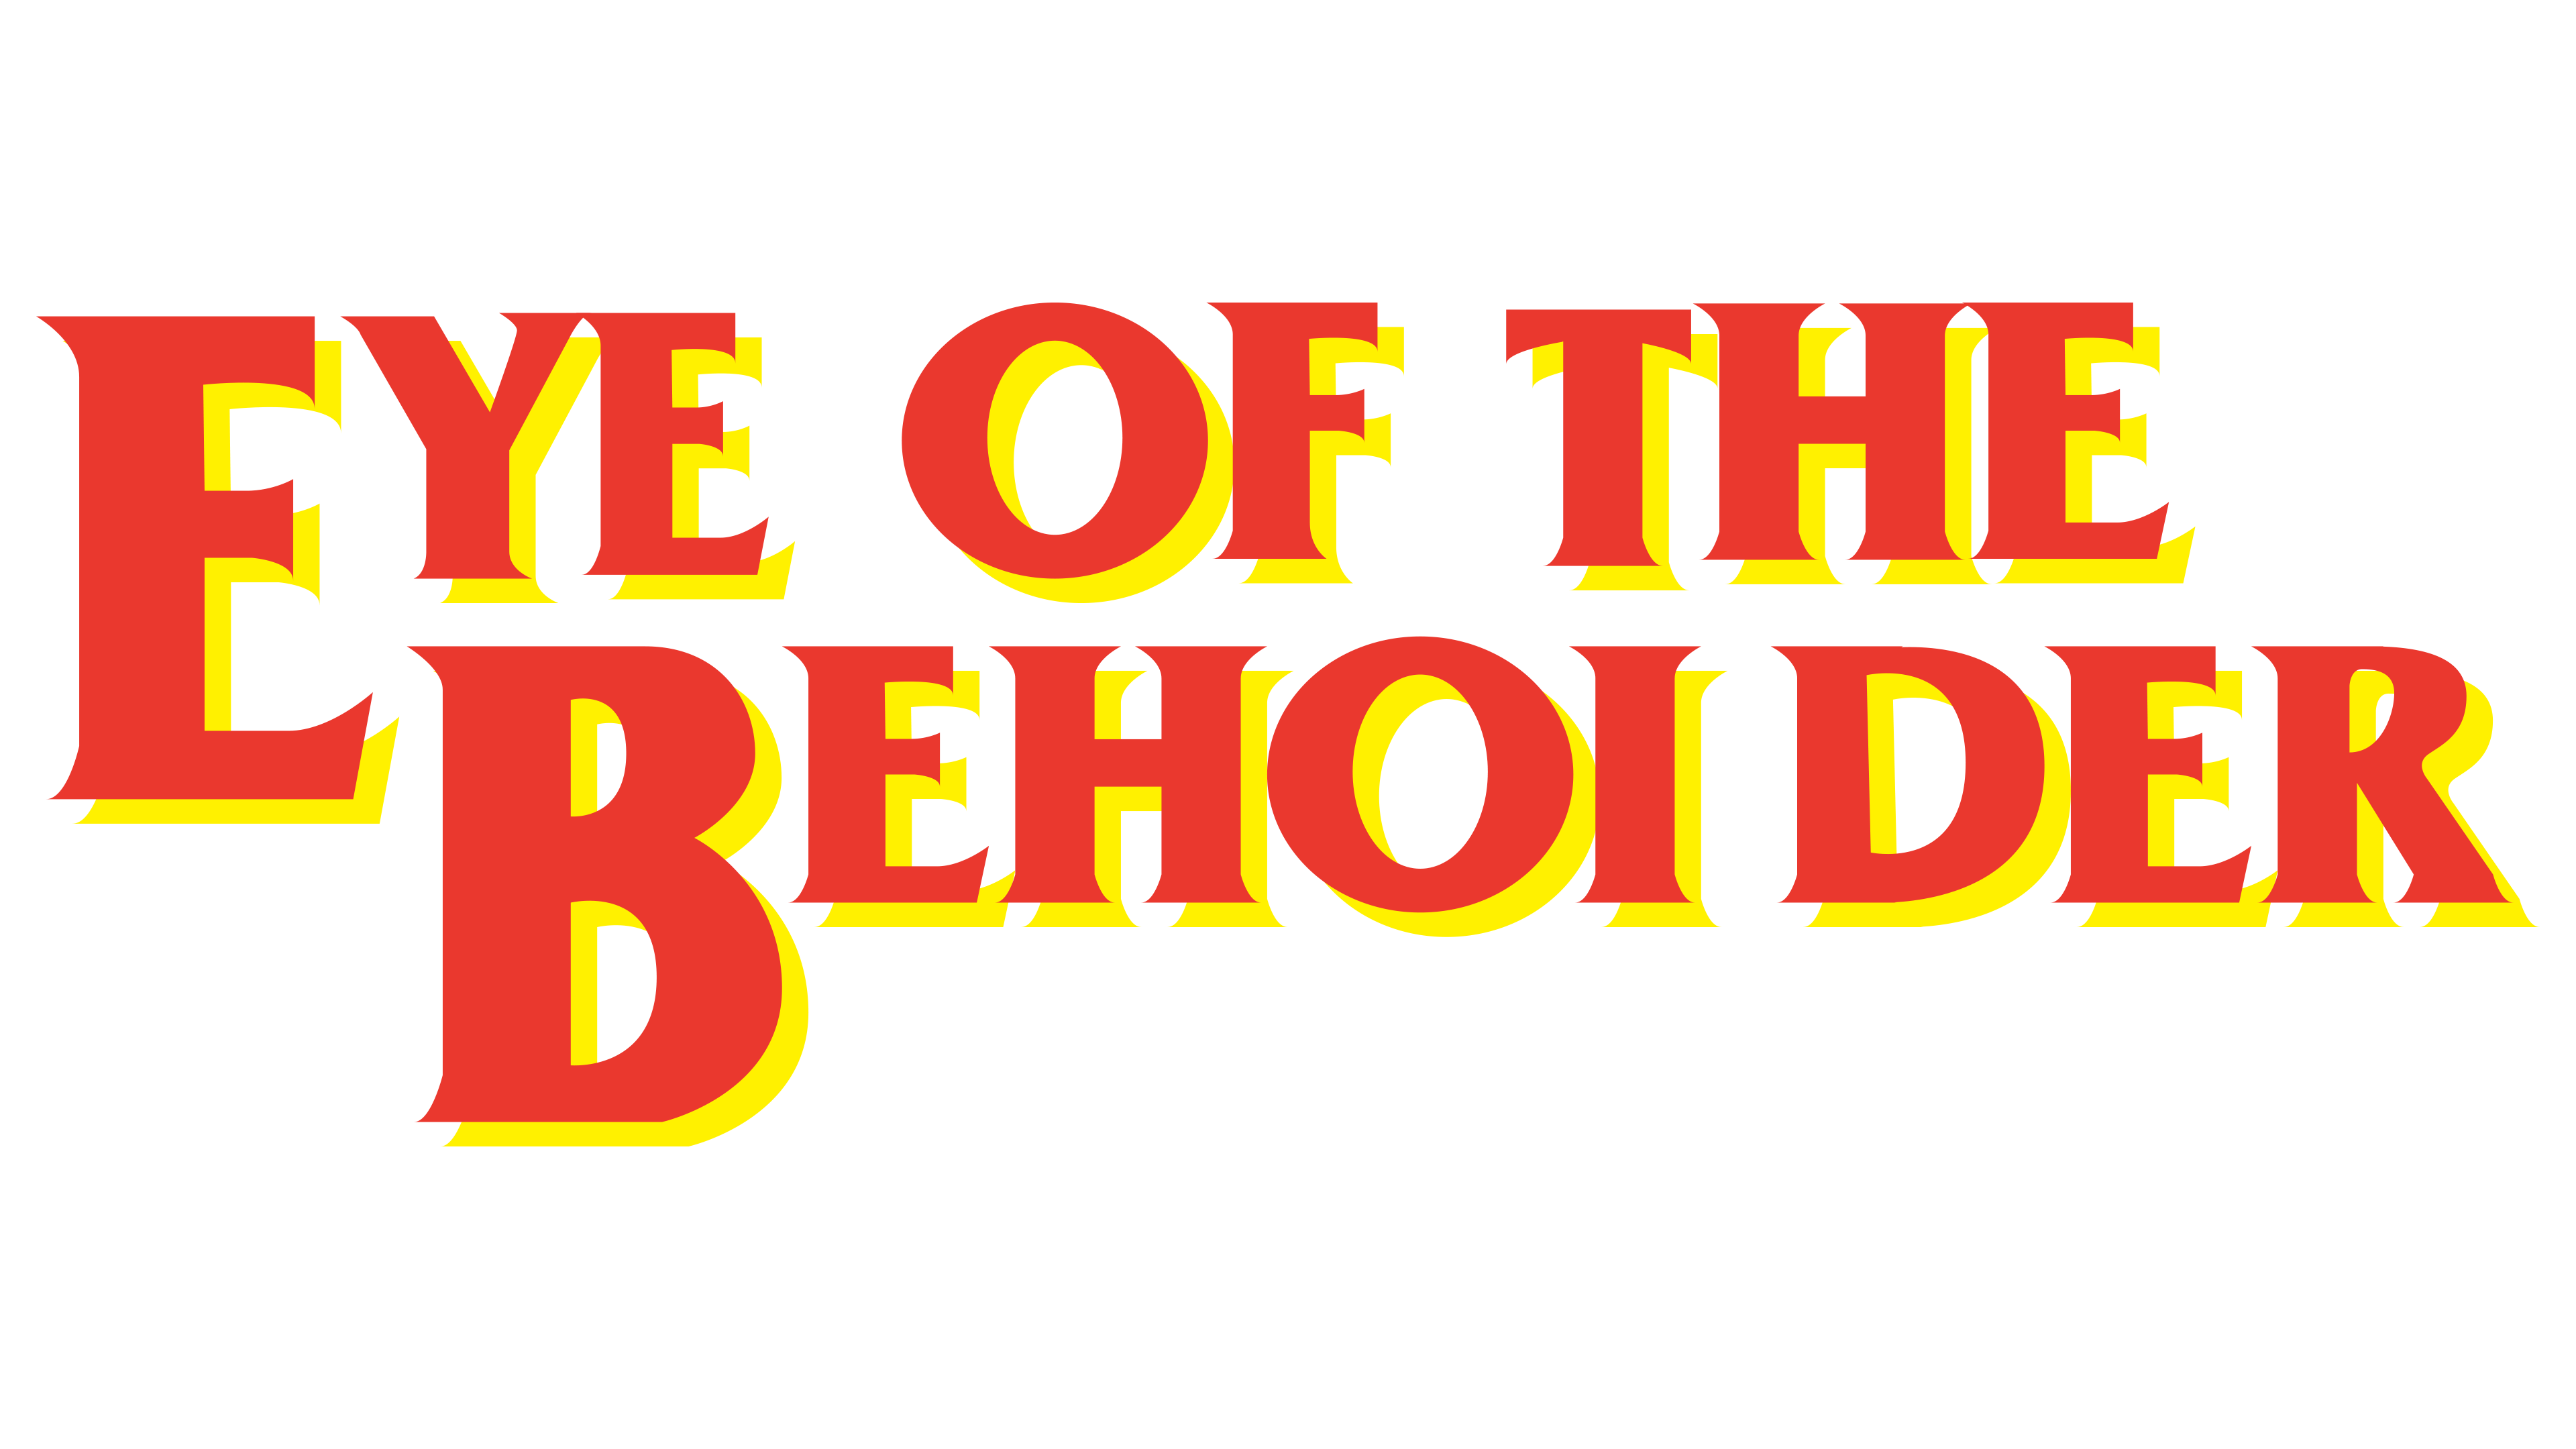 eye of the beholder 3 browser